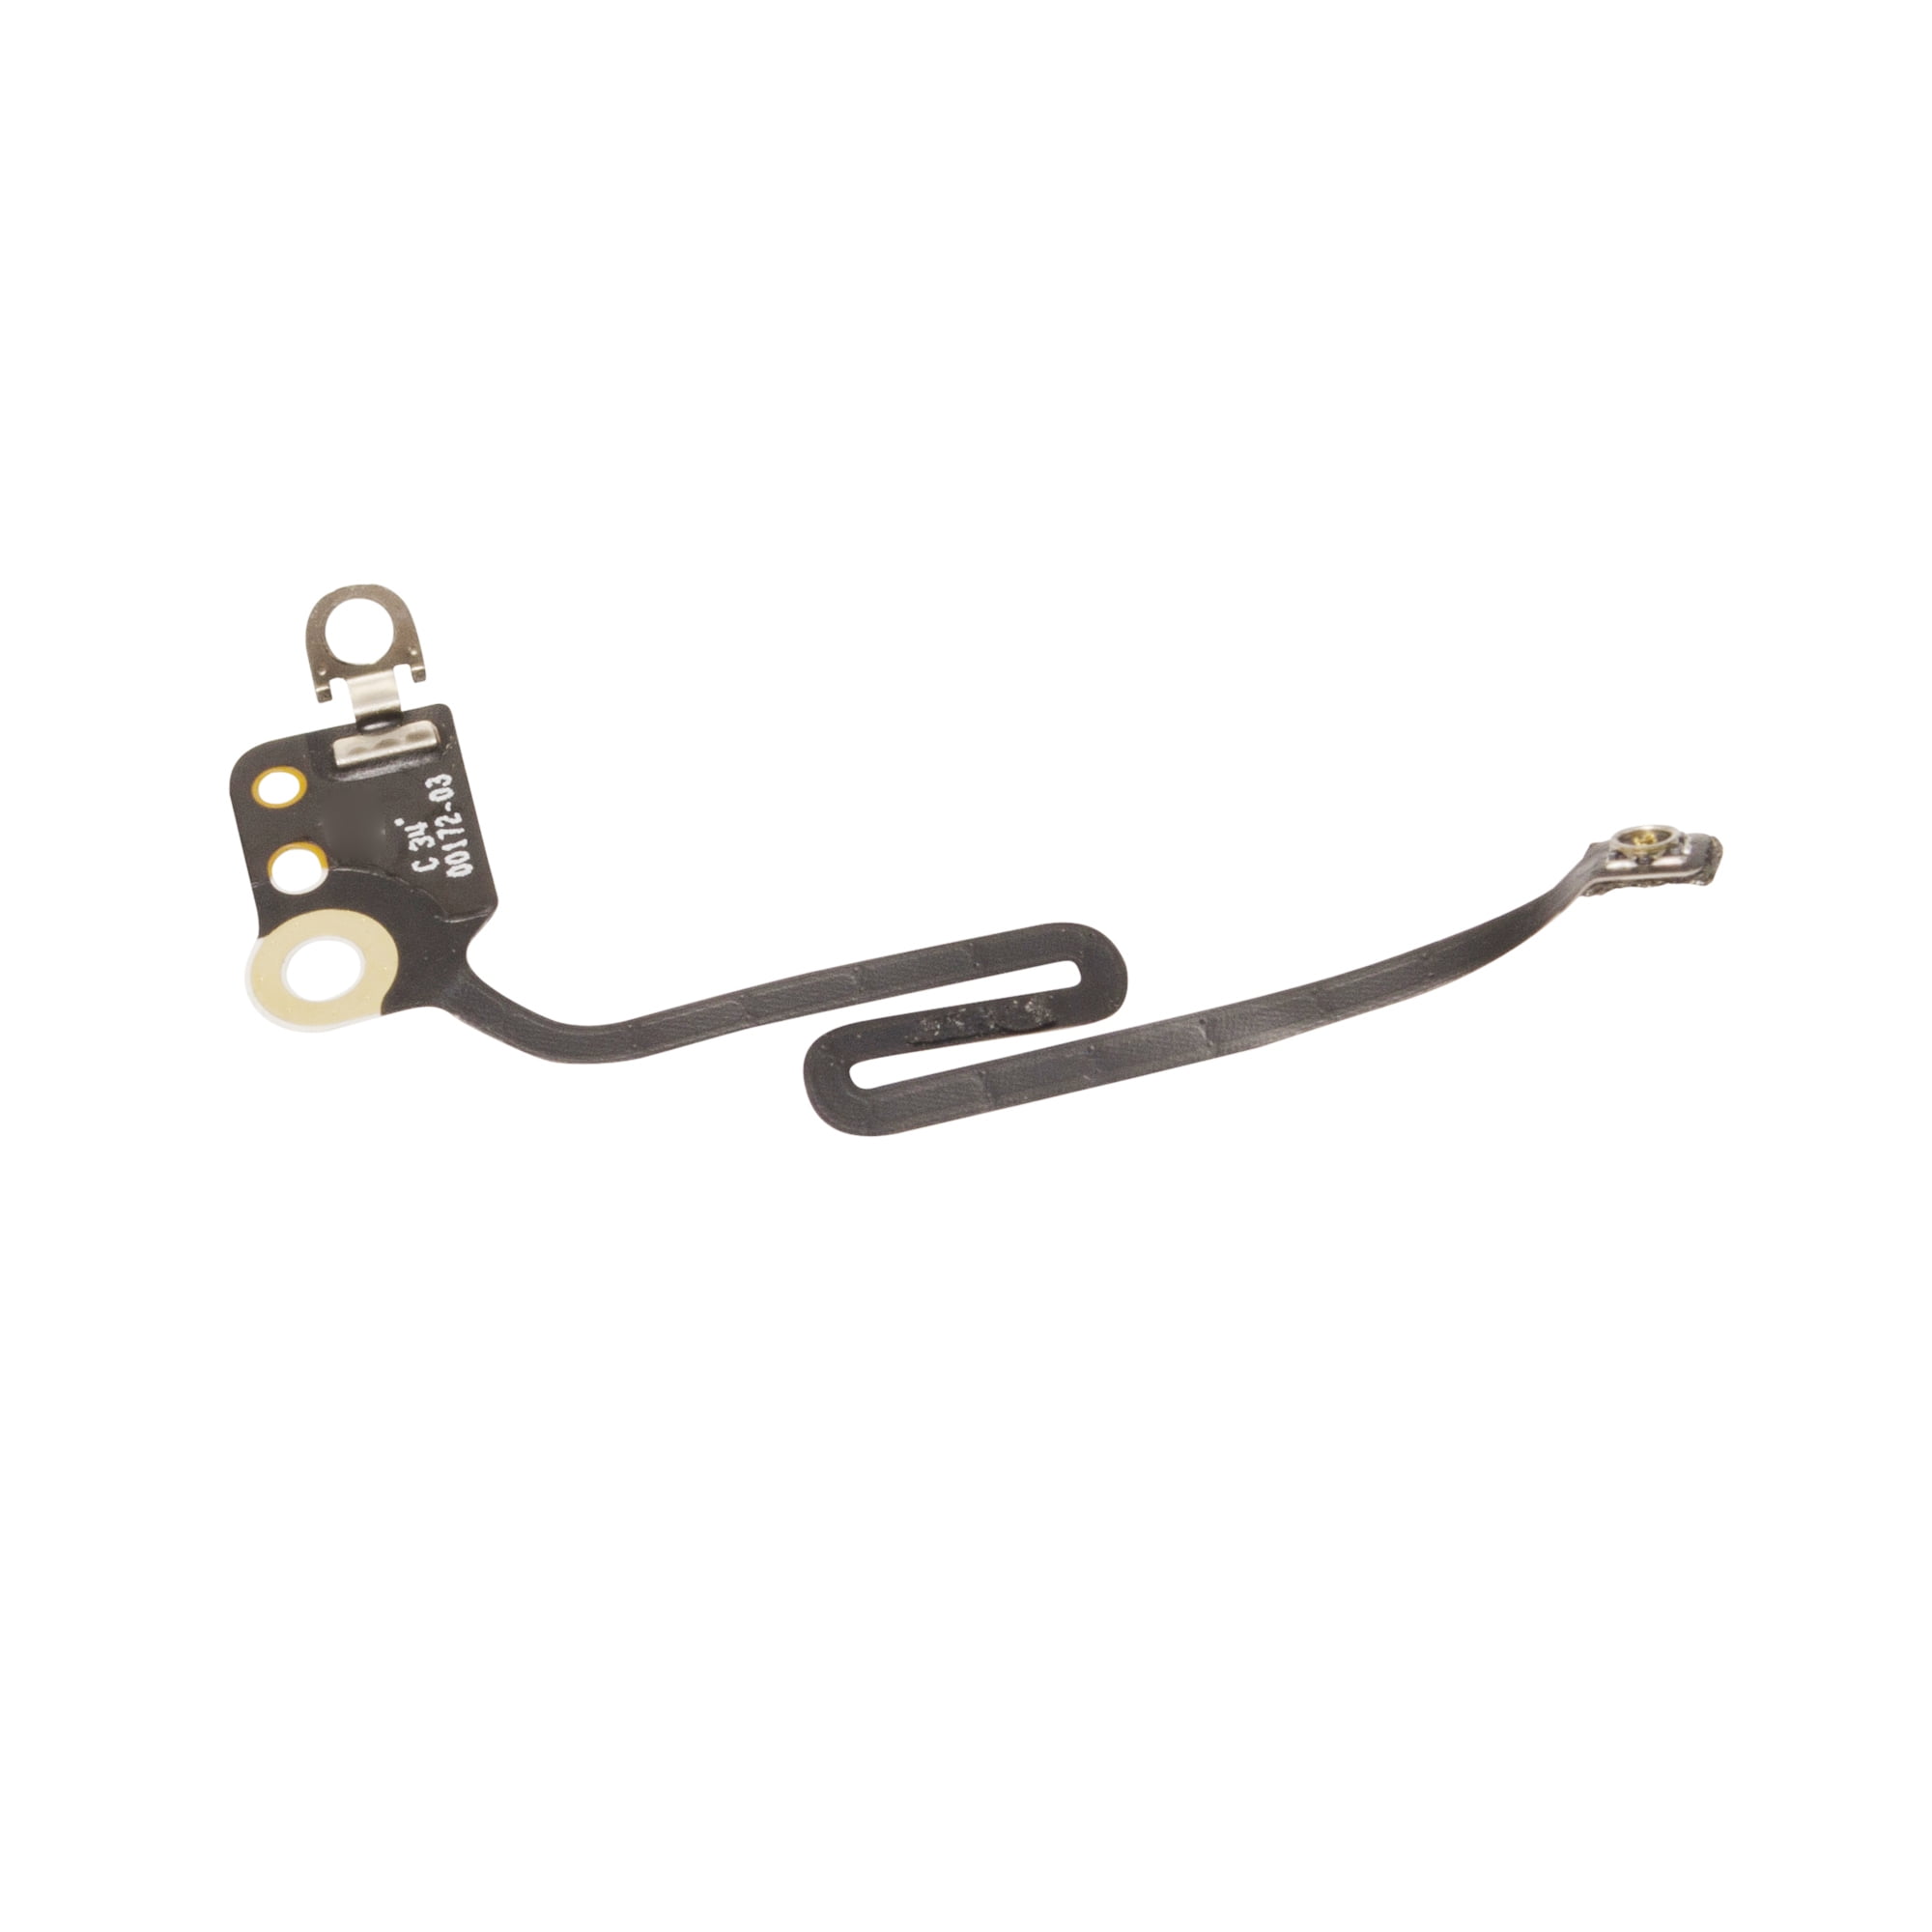 Apple Repair Parts :: IPHONE :: Apple iPhone 6 Plus :: iPhone 6 Plus Flex  Cable Ribbon with Wifi Antenna